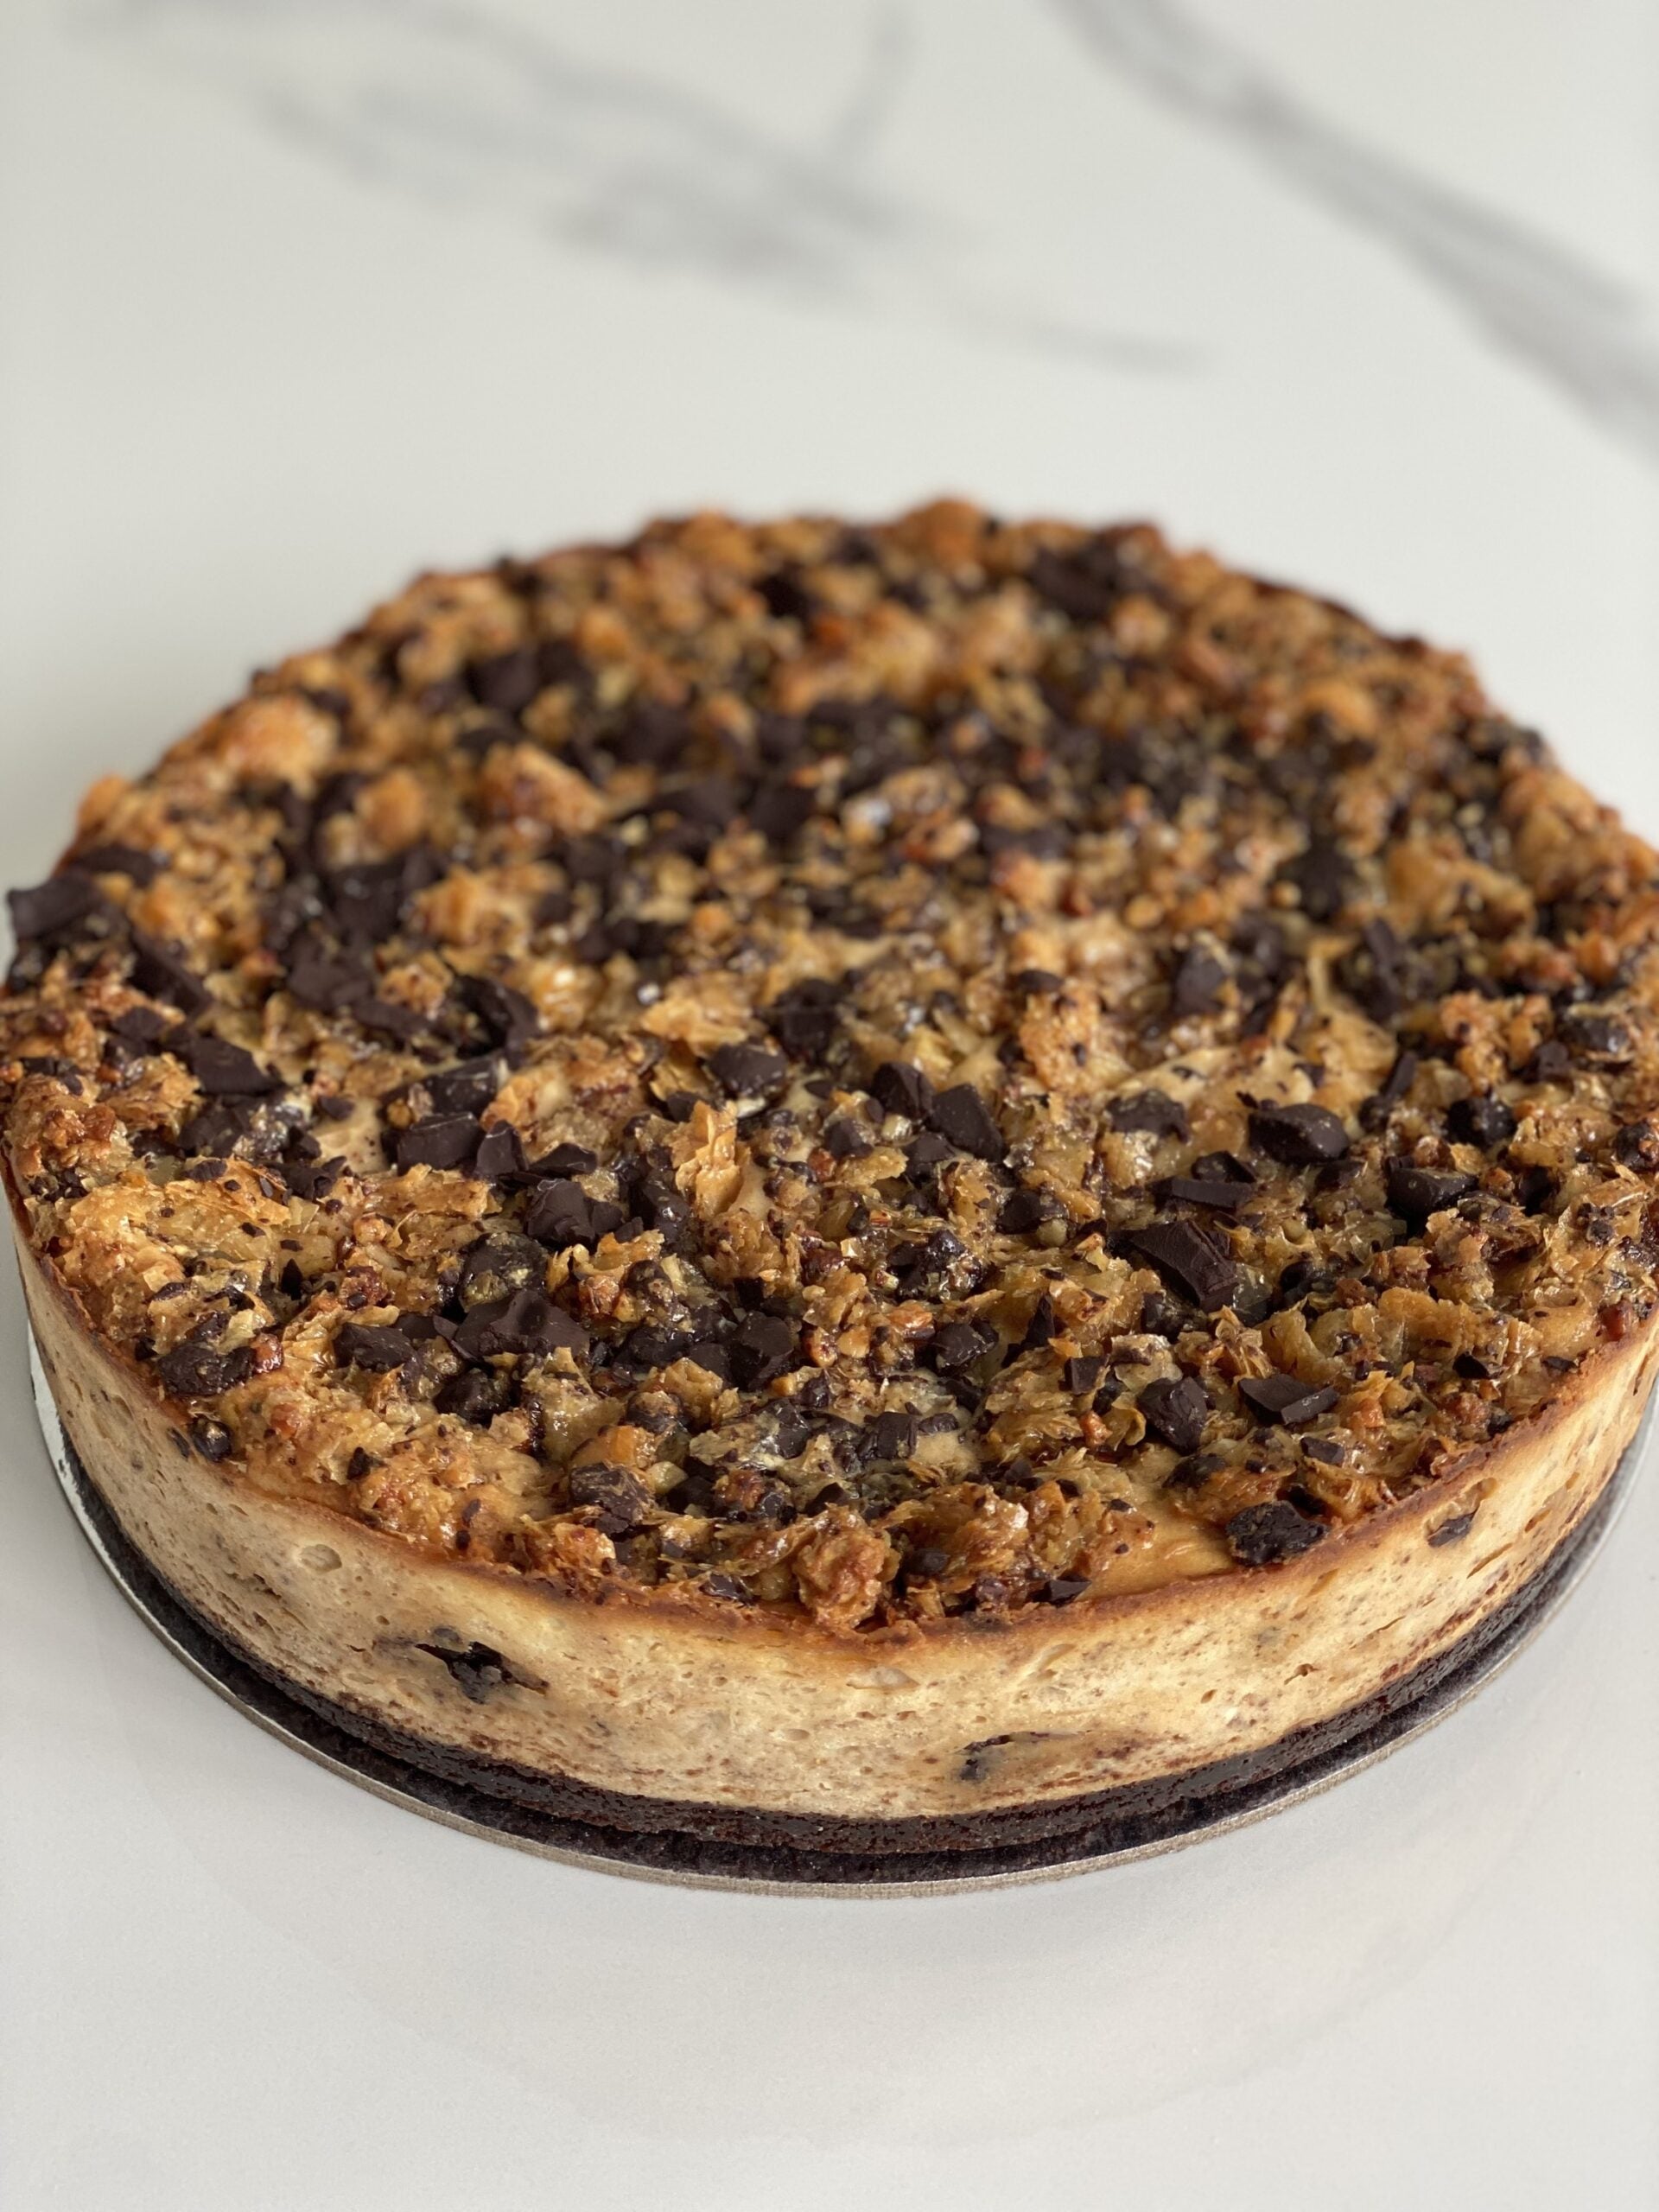 a whole chocolate and baklava cheesecake